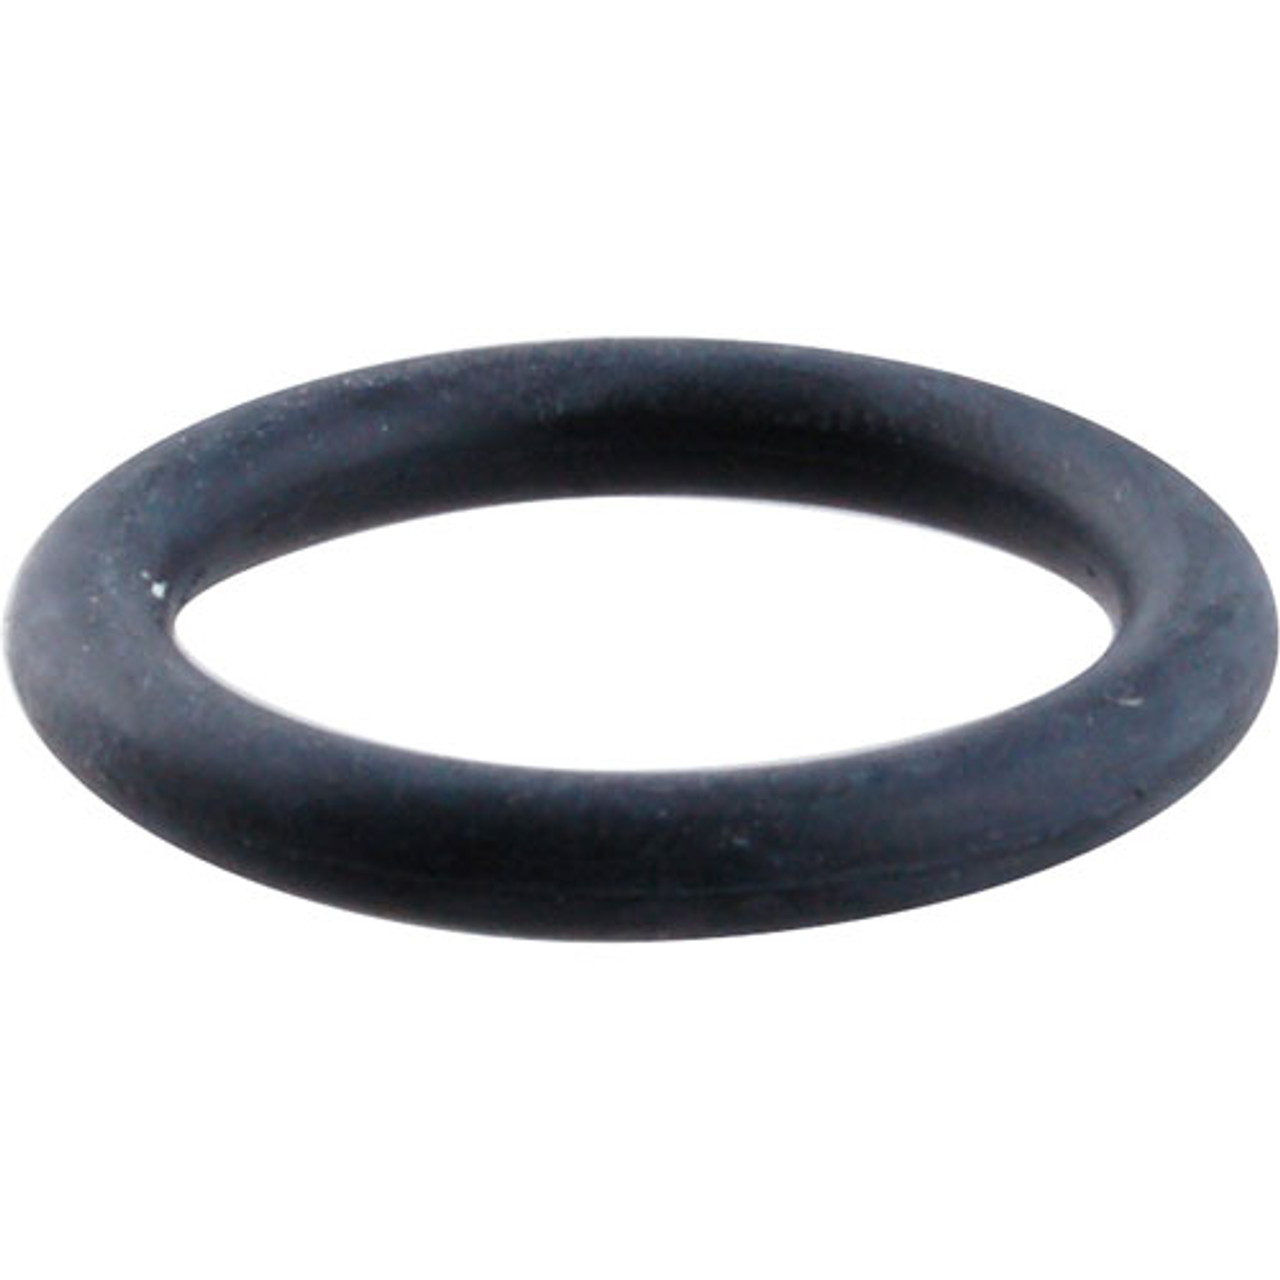 O-Ring, 1-1/16" Od - Replacement Part For Taylor Freezer 020571